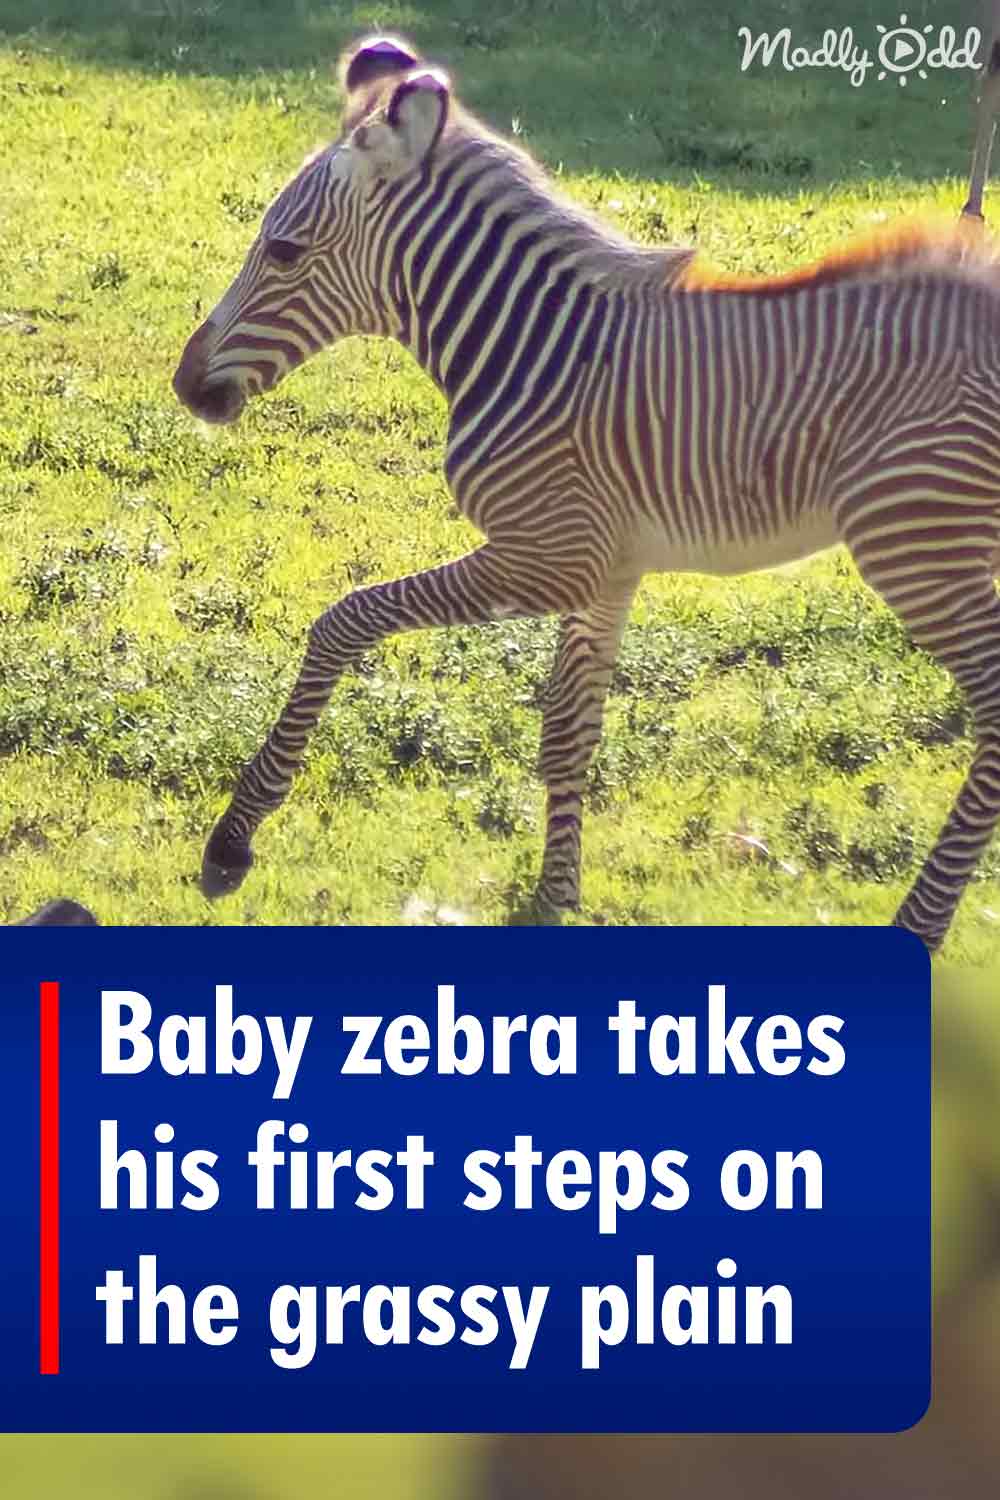 Baby zebra takes his first steps on the grassy plain